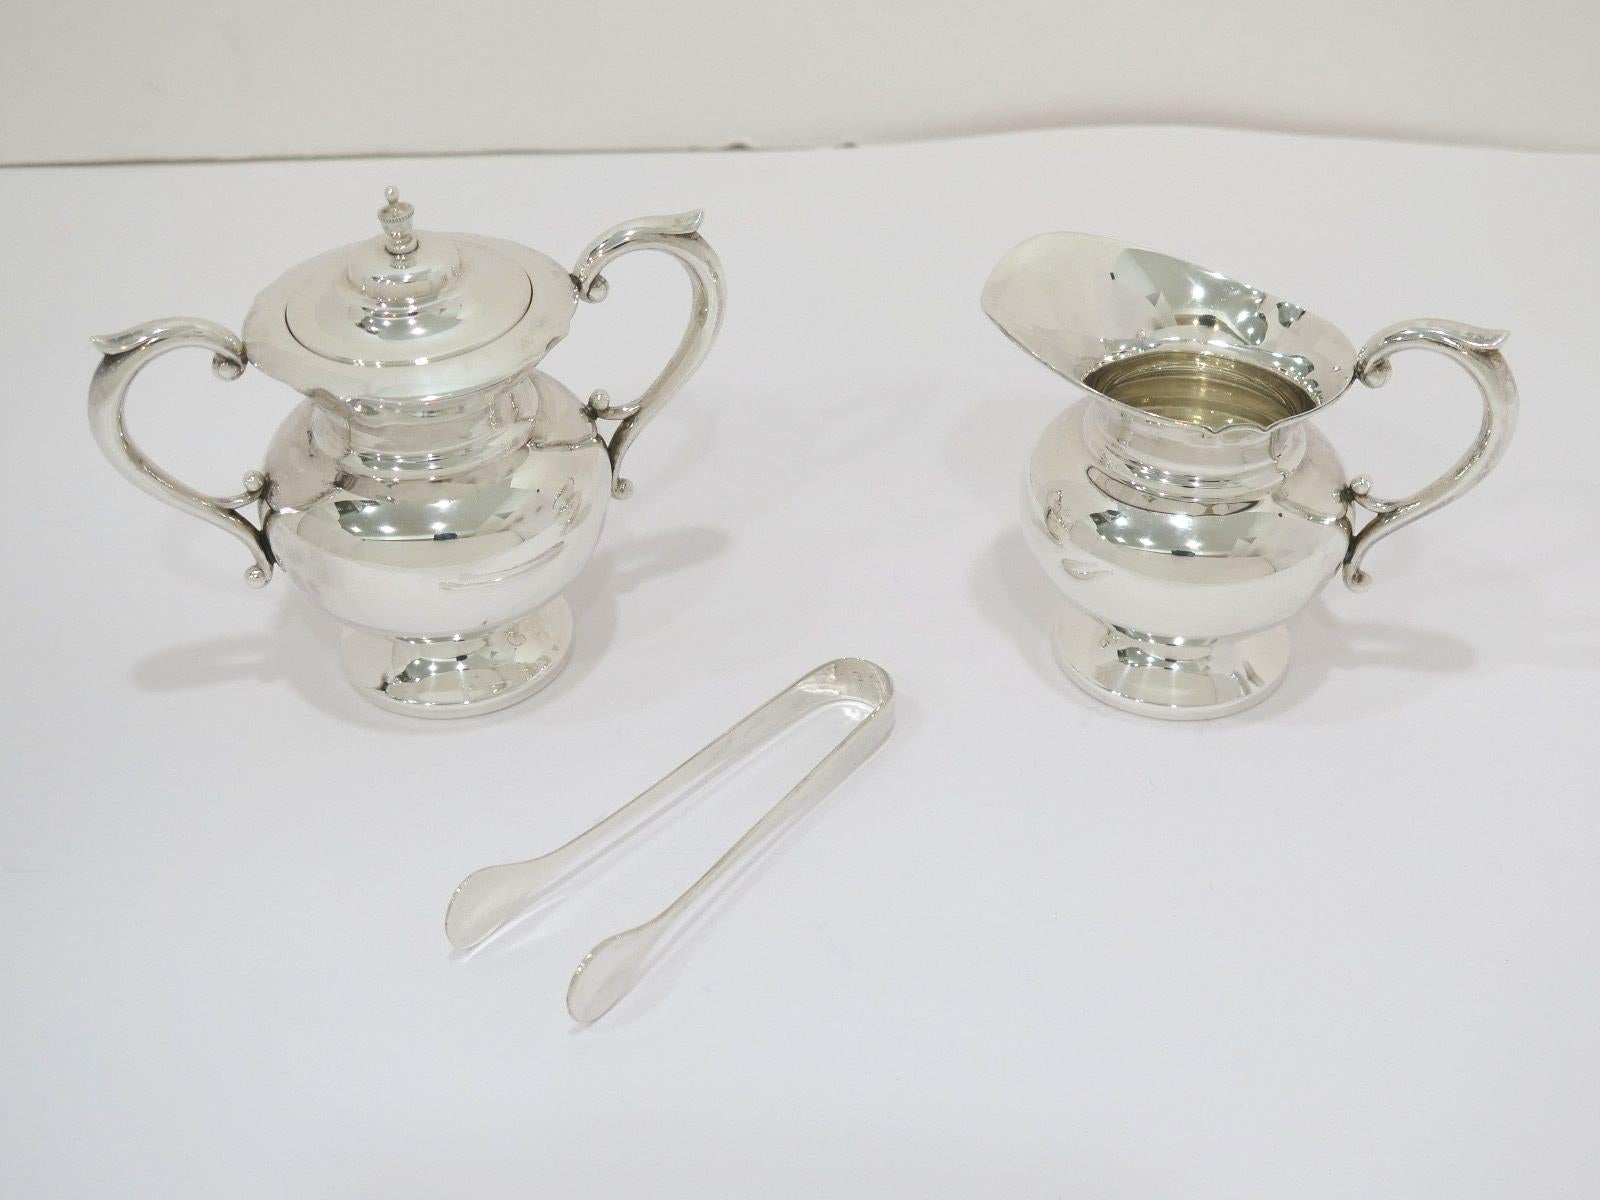 Sugar Bowl (H x L x D): 4 x 4.75 x 2 5/8 in

Creamer (H x L x D): 3 1/8 x 4 x 2.5 in

Sugar Tongs: 4 in

Weight: 6.2 toz.